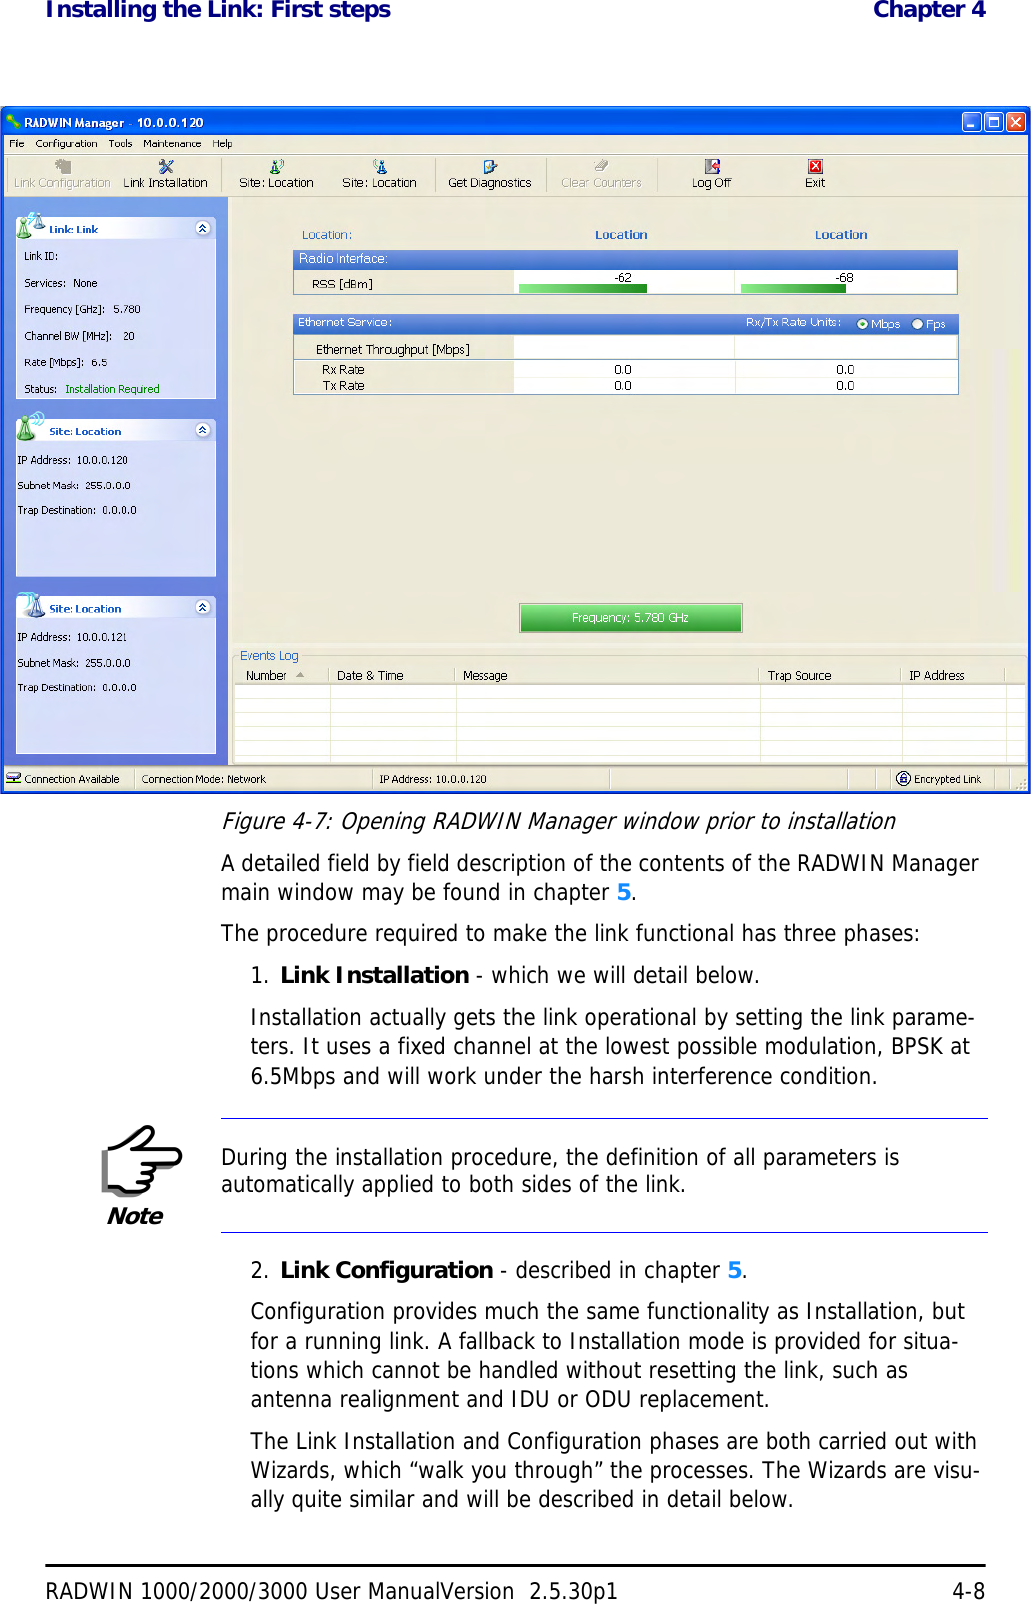 Installing the Link: First steps  Chapter 4RADWIN 1000/2000/3000 User ManualVersion  2.5.30p1 4-8Figure 4-7: Opening RADWIN Manager window prior to installationA detailed field by field description of the contents of the RADWIN Manager main window may be found in chapter 5.The procedure required to make the link functional has three phases:1. Link Installation - which we will detail below.Installation actually gets the link operational by setting the link parame-ters. It uses a fixed channel at the lowest possible modulation, BPSK at 6.5Mbps and will work under the harsh interference condition. 2. Link Configuration - described in chapter 5.Configuration provides much the same functionality as Installation, but for a running link. A fallback to Installation mode is provided for situa-tions which cannot be handled without resetting the link, such as antenna realignment and IDU or ODU replacement.The Link Installation and Configuration phases are both carried out with Wizards, which “walk you through” the processes. The Wizards are visu-ally quite similar and will be described in detail below. NoteDuring the installation procedure, the definition of all parameters is automatically applied to both sides of the link.